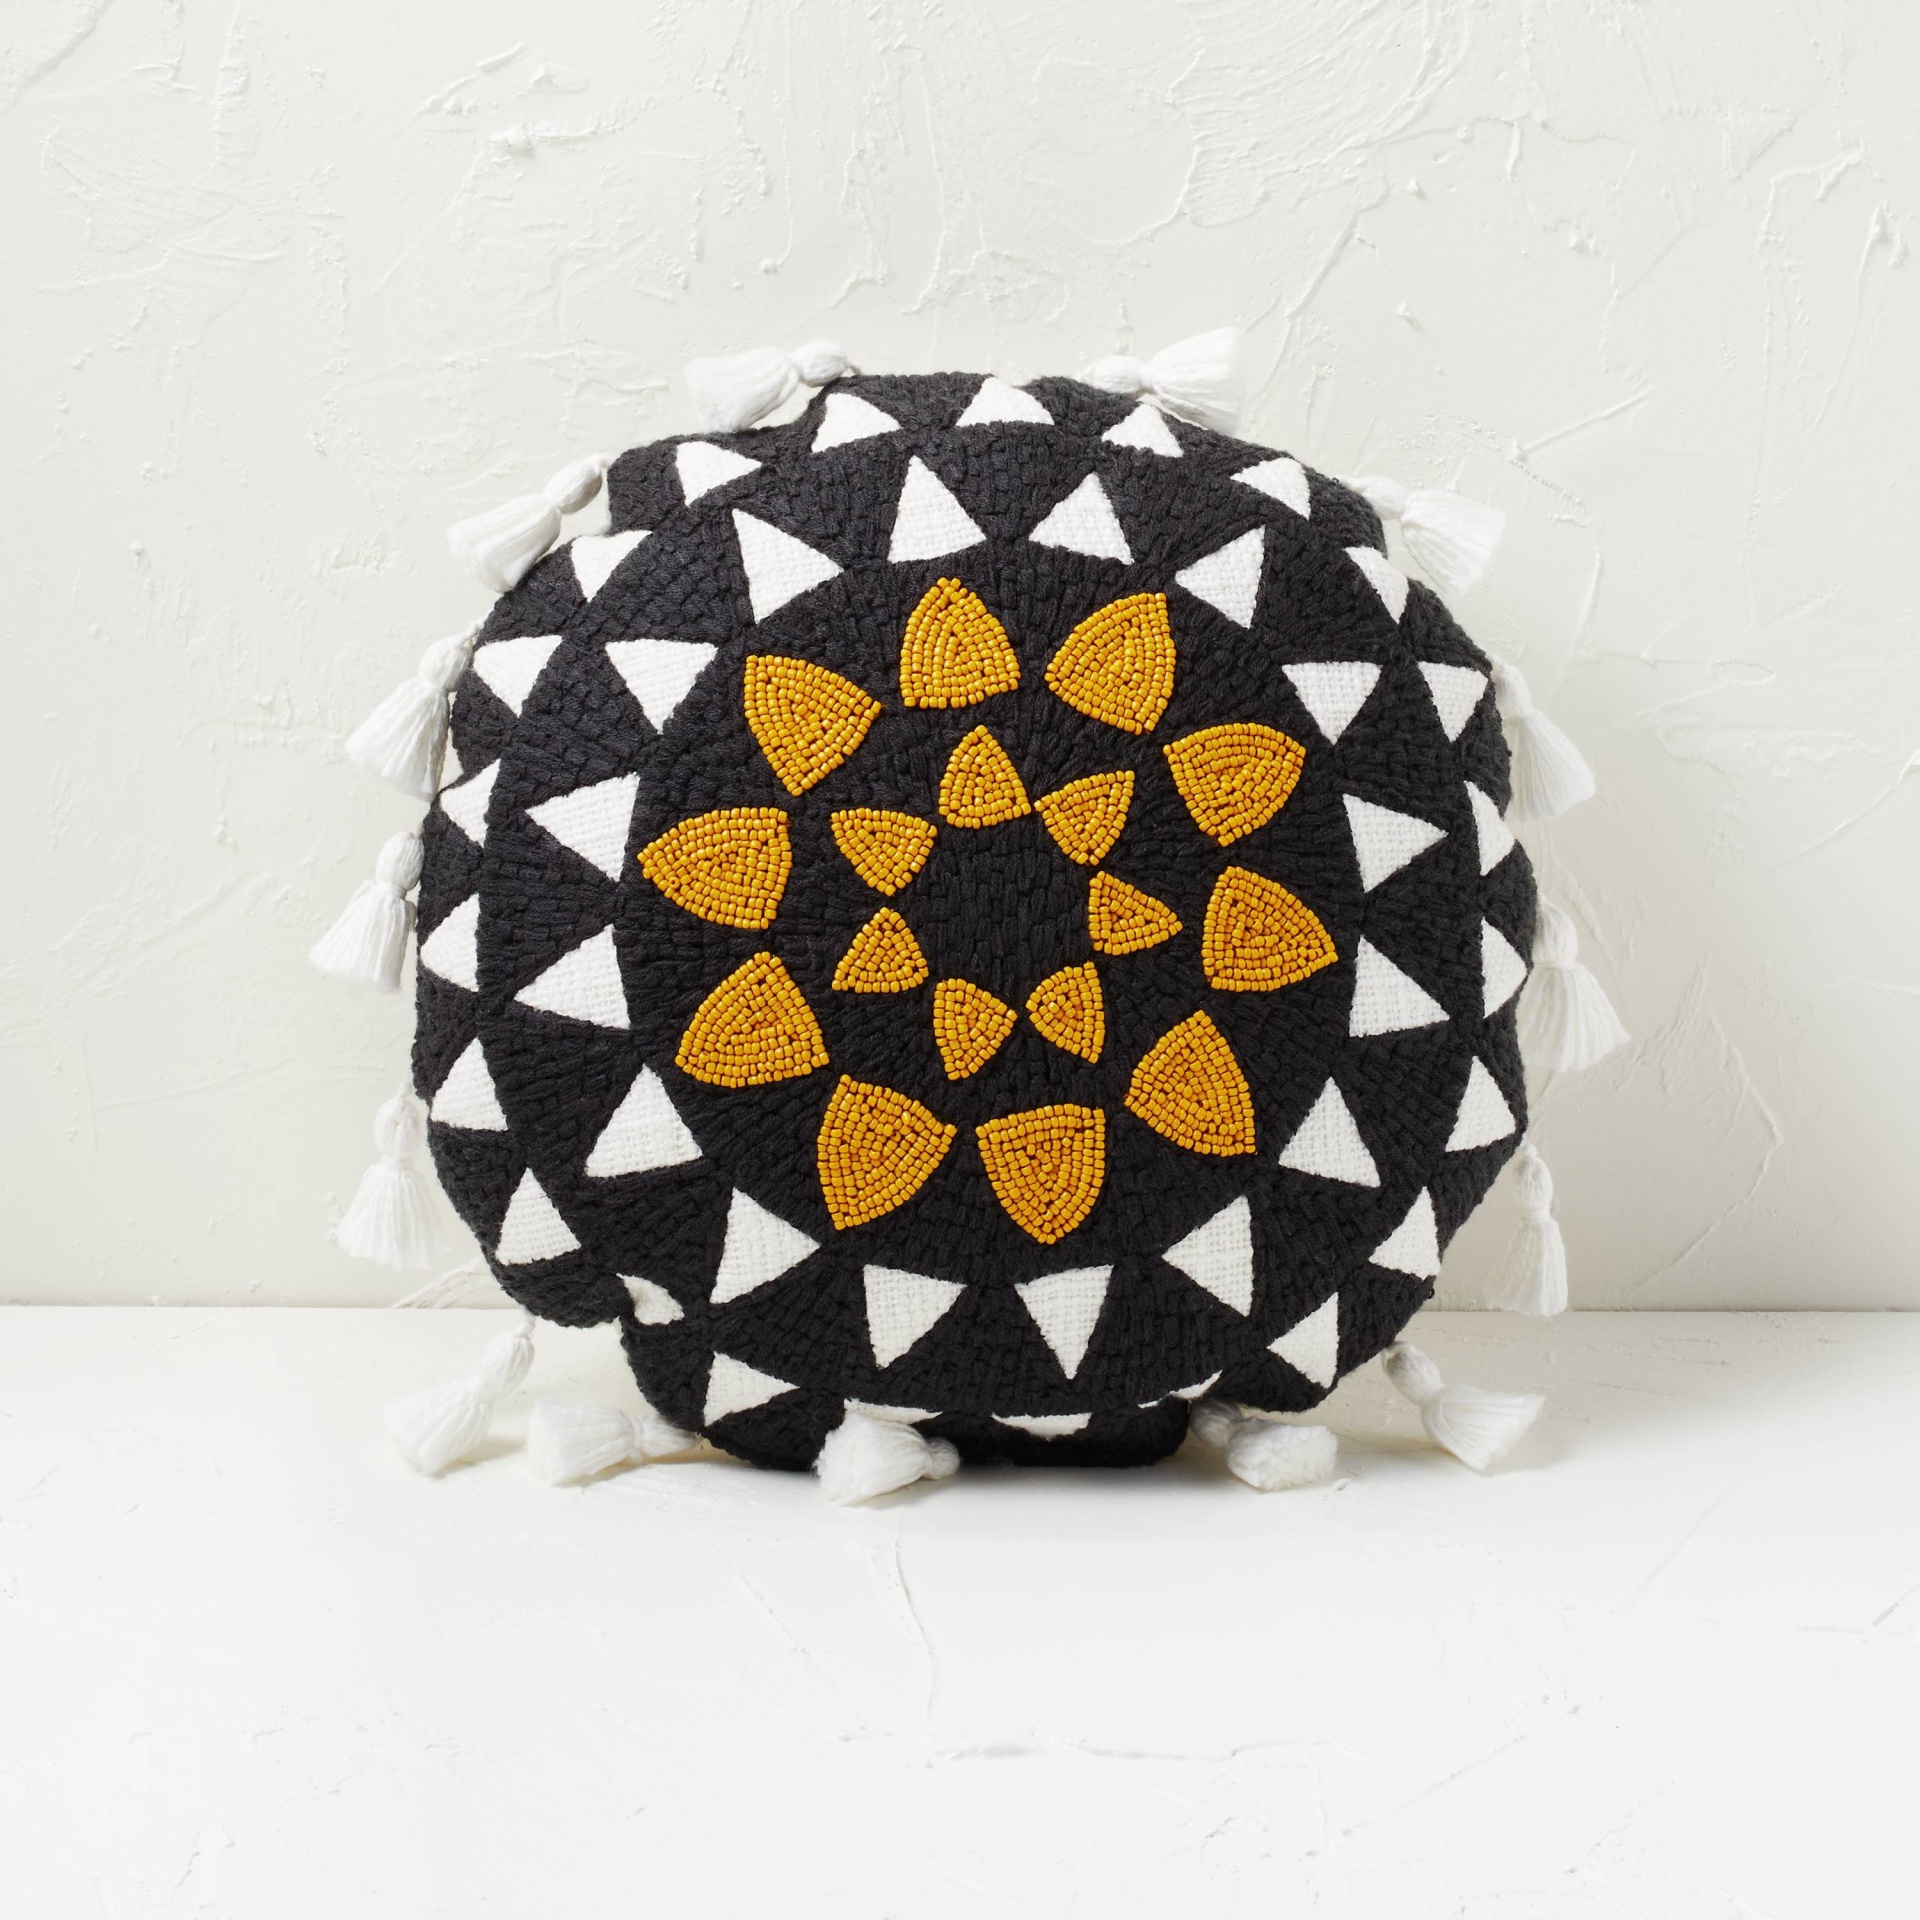 Square Embellished Geometric Decorative Throw Pillow Off-White/Black - Opalhouse Designed with Jungalow